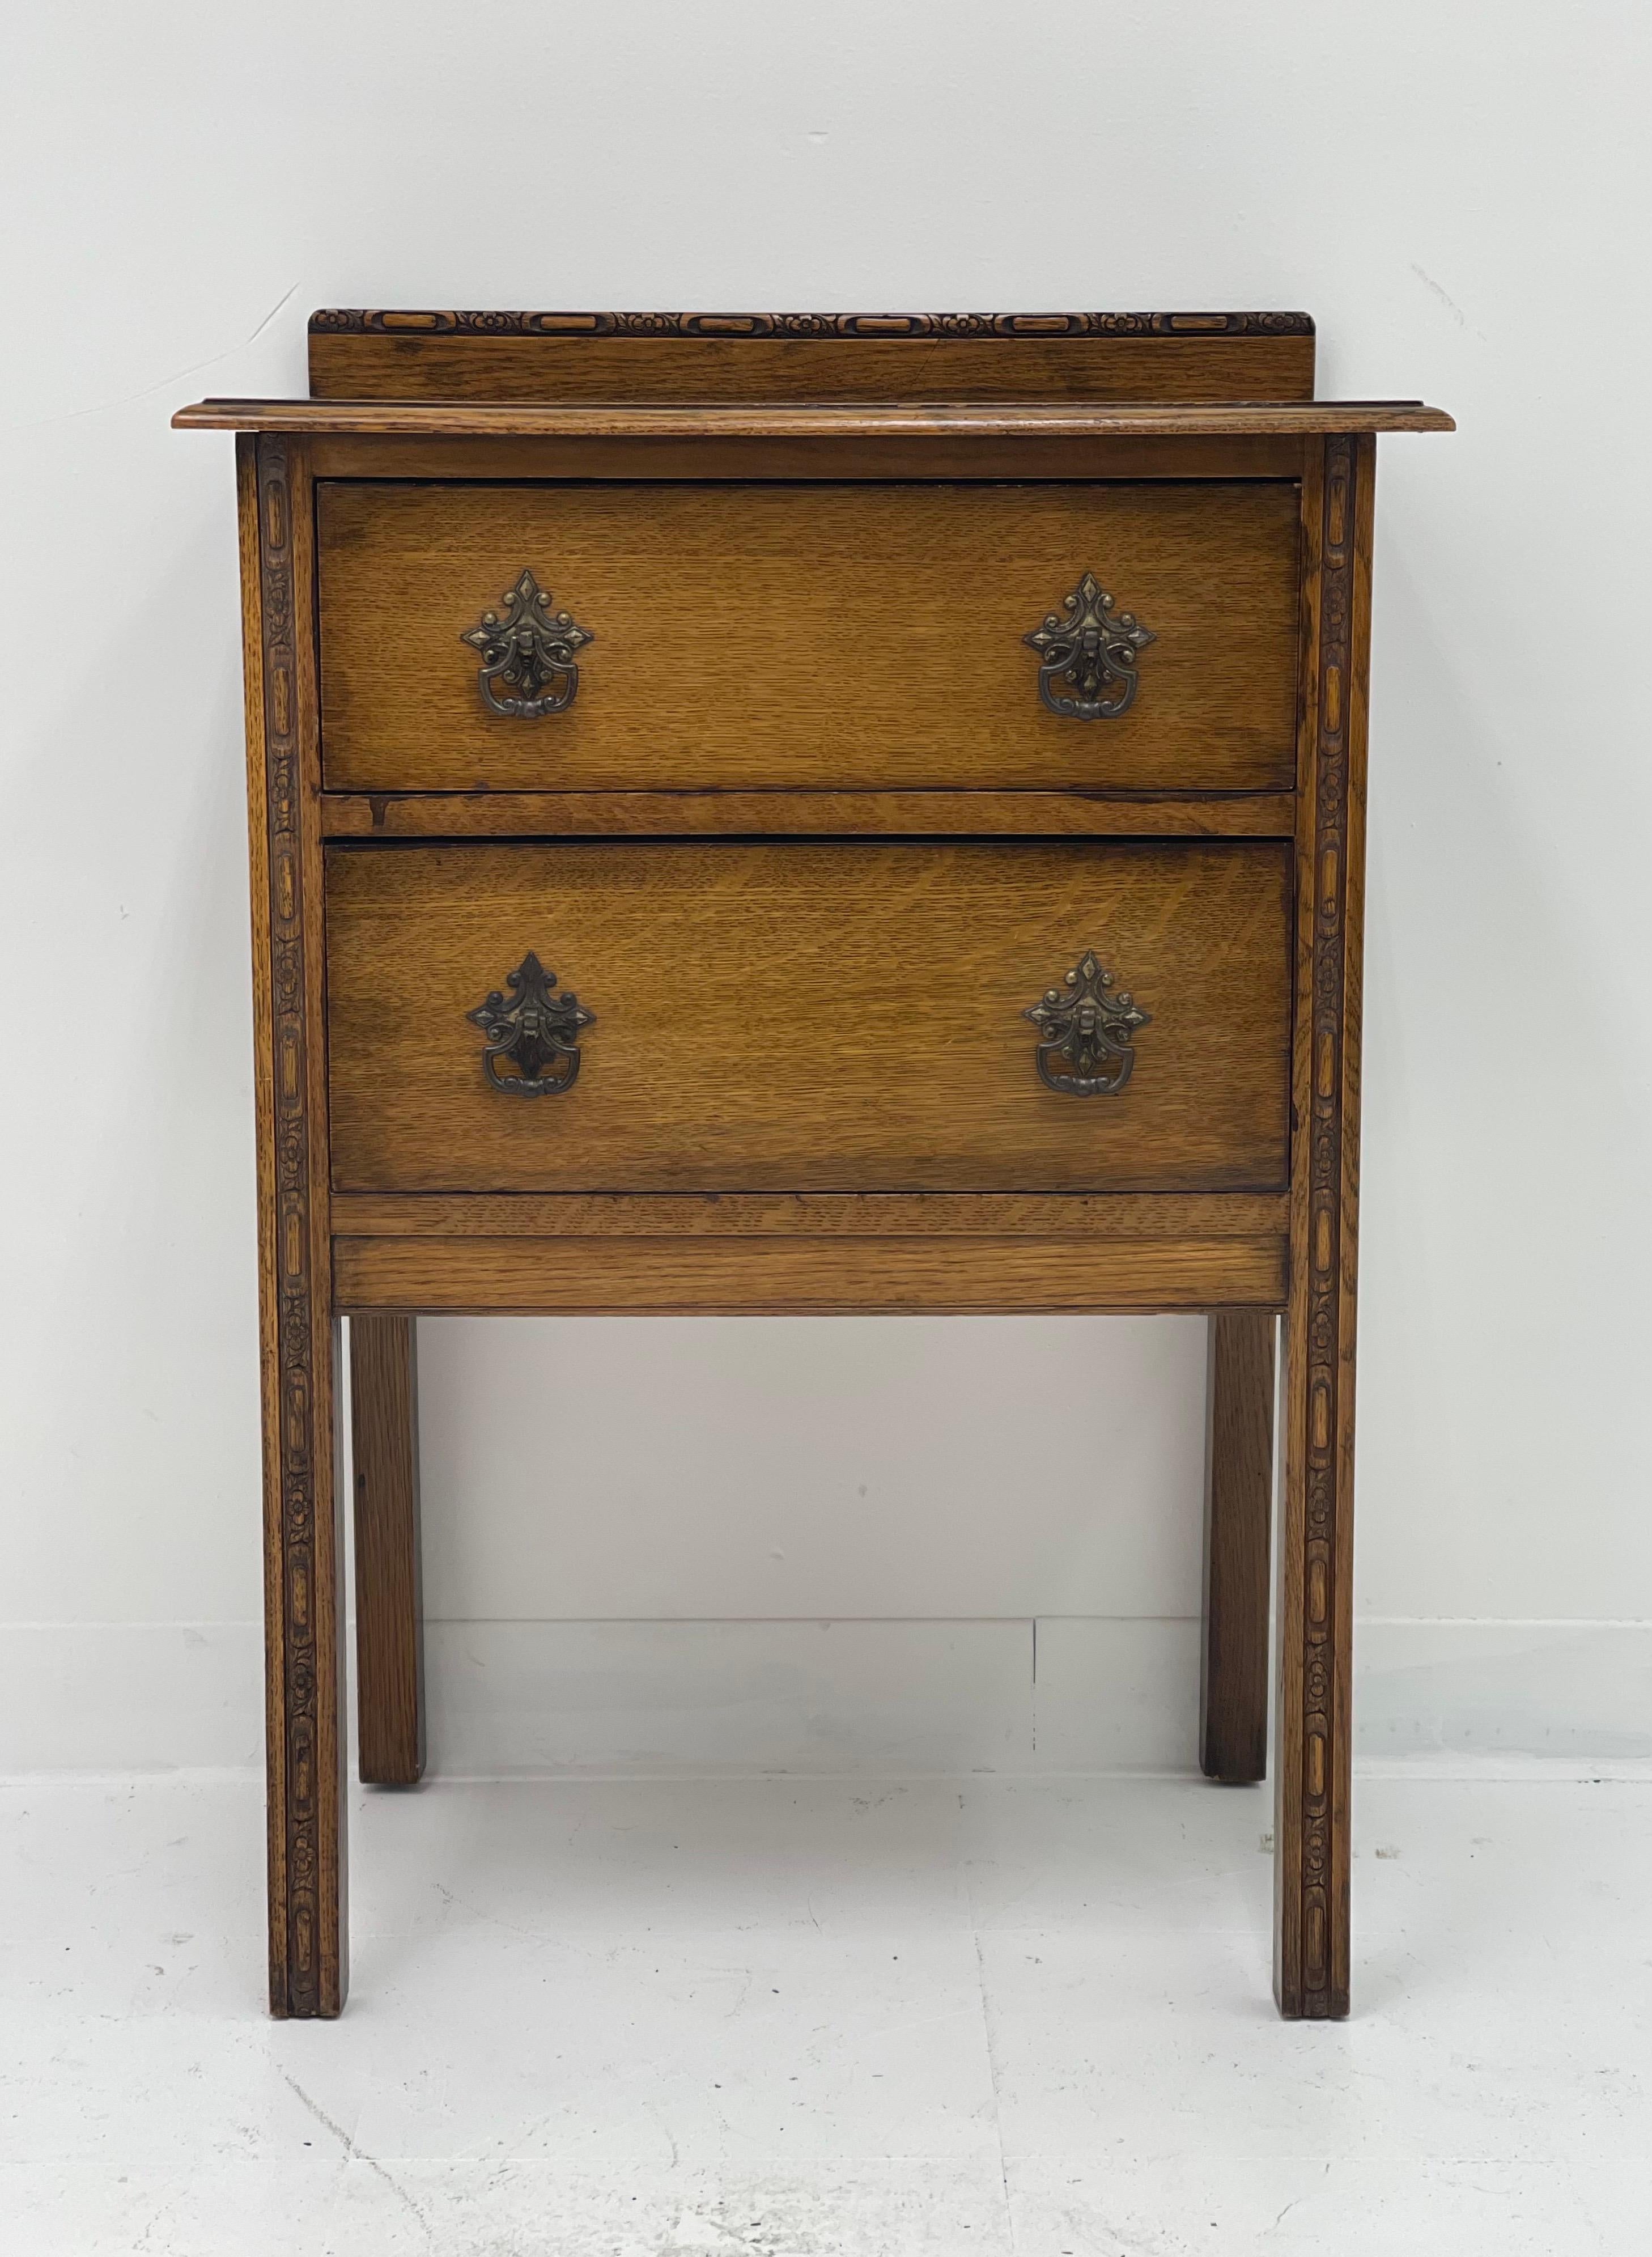 Antique Early American oak 2 drawer dresser base with square legs and a lovely shaped top apron with hand carved details.